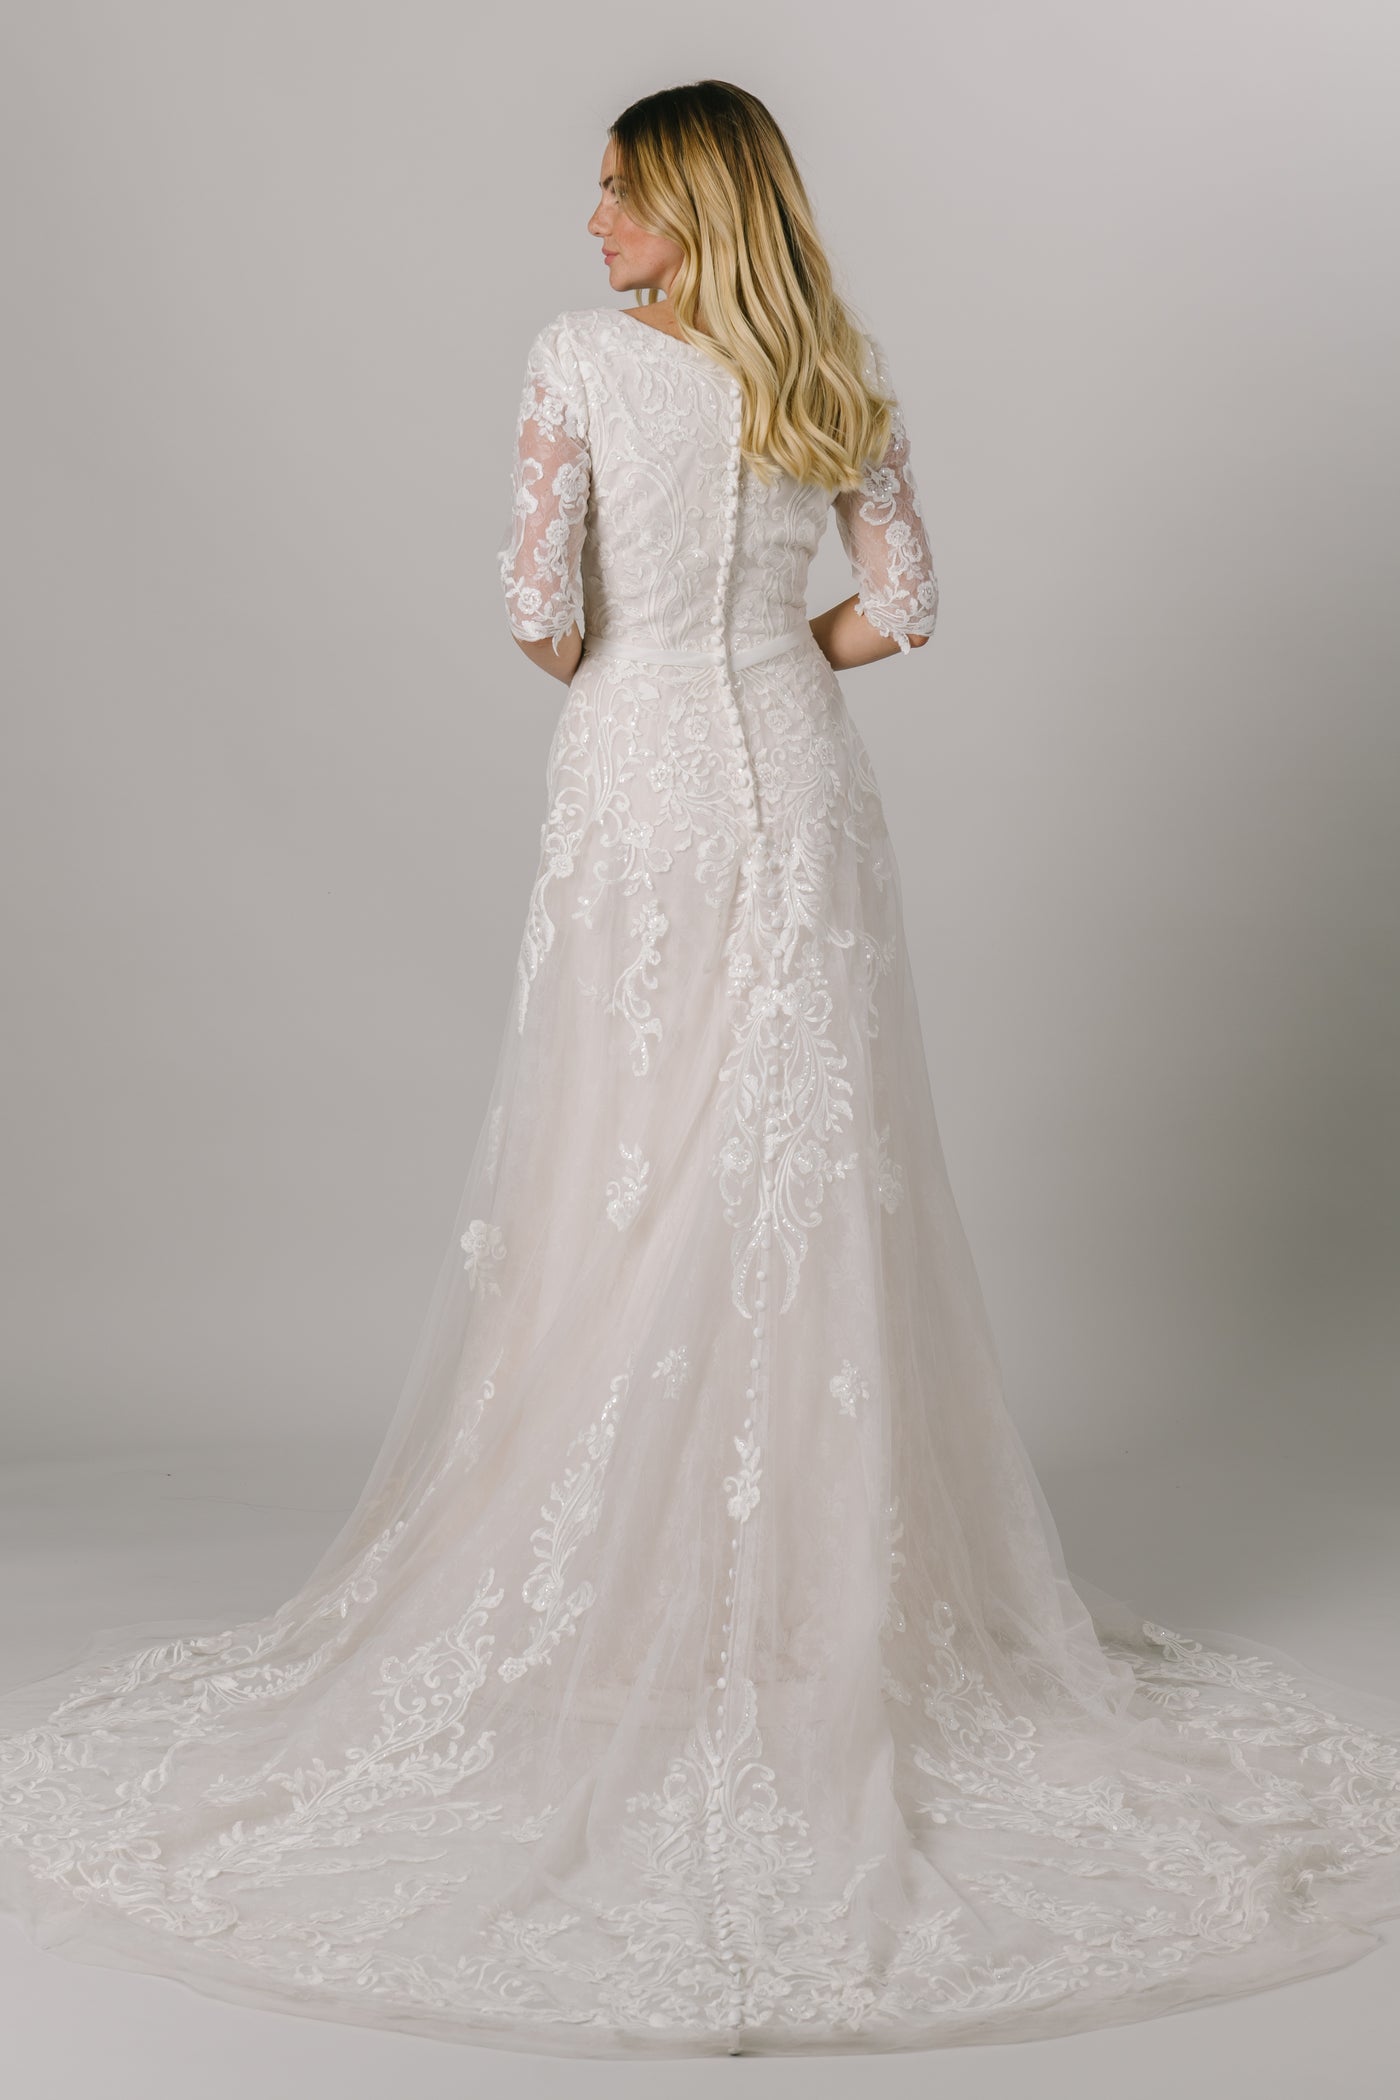 This modest wedding dress has a flattering a-line fit with an absolutely gorgeous lace pattern. With half sleeves and buttons down the back, how could we say no?  Style Love: Little belt with an adorable bow to accentuate the waist! From a bridal shop in downtown Salt Lake City called LatterDayBride.